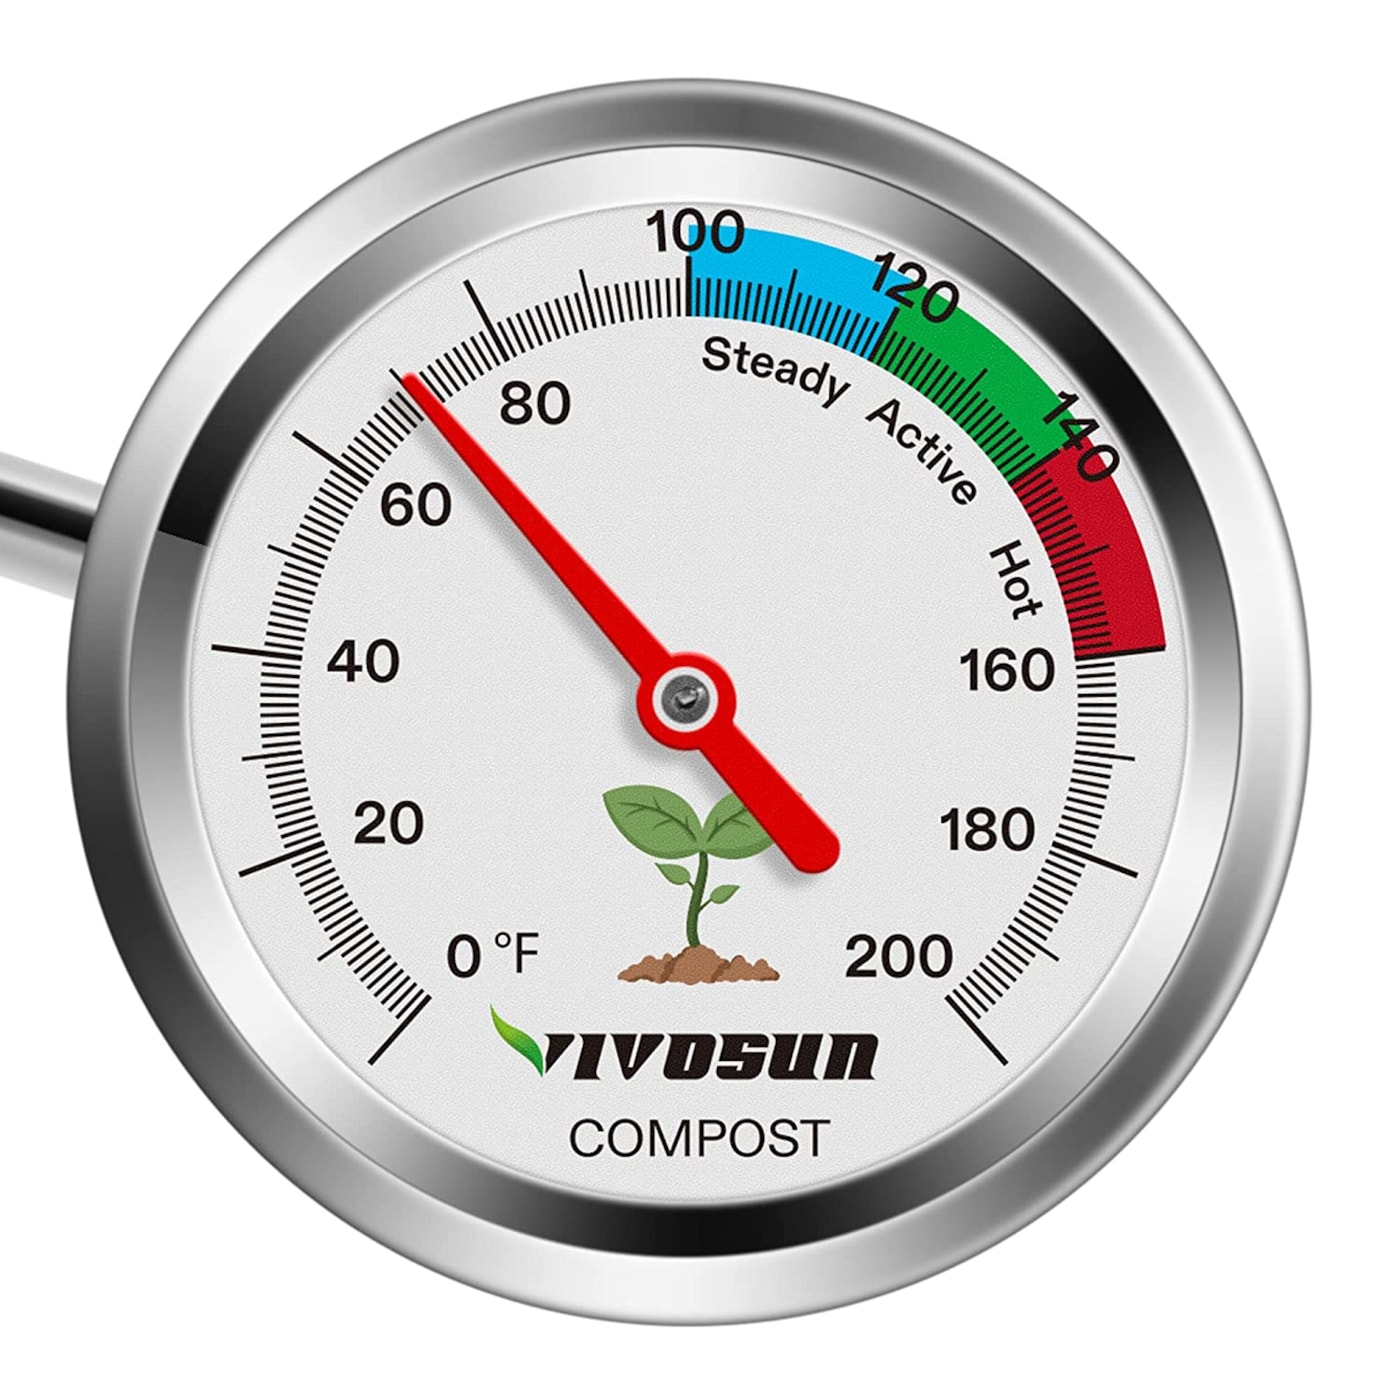 VIVOSUN Compost Thermometer, Backyard Soil Thermometer with Stainless Steel Dial for Composting Bins, Outdoor Gardening and Planting (20 Inch & 0 - 200°F)